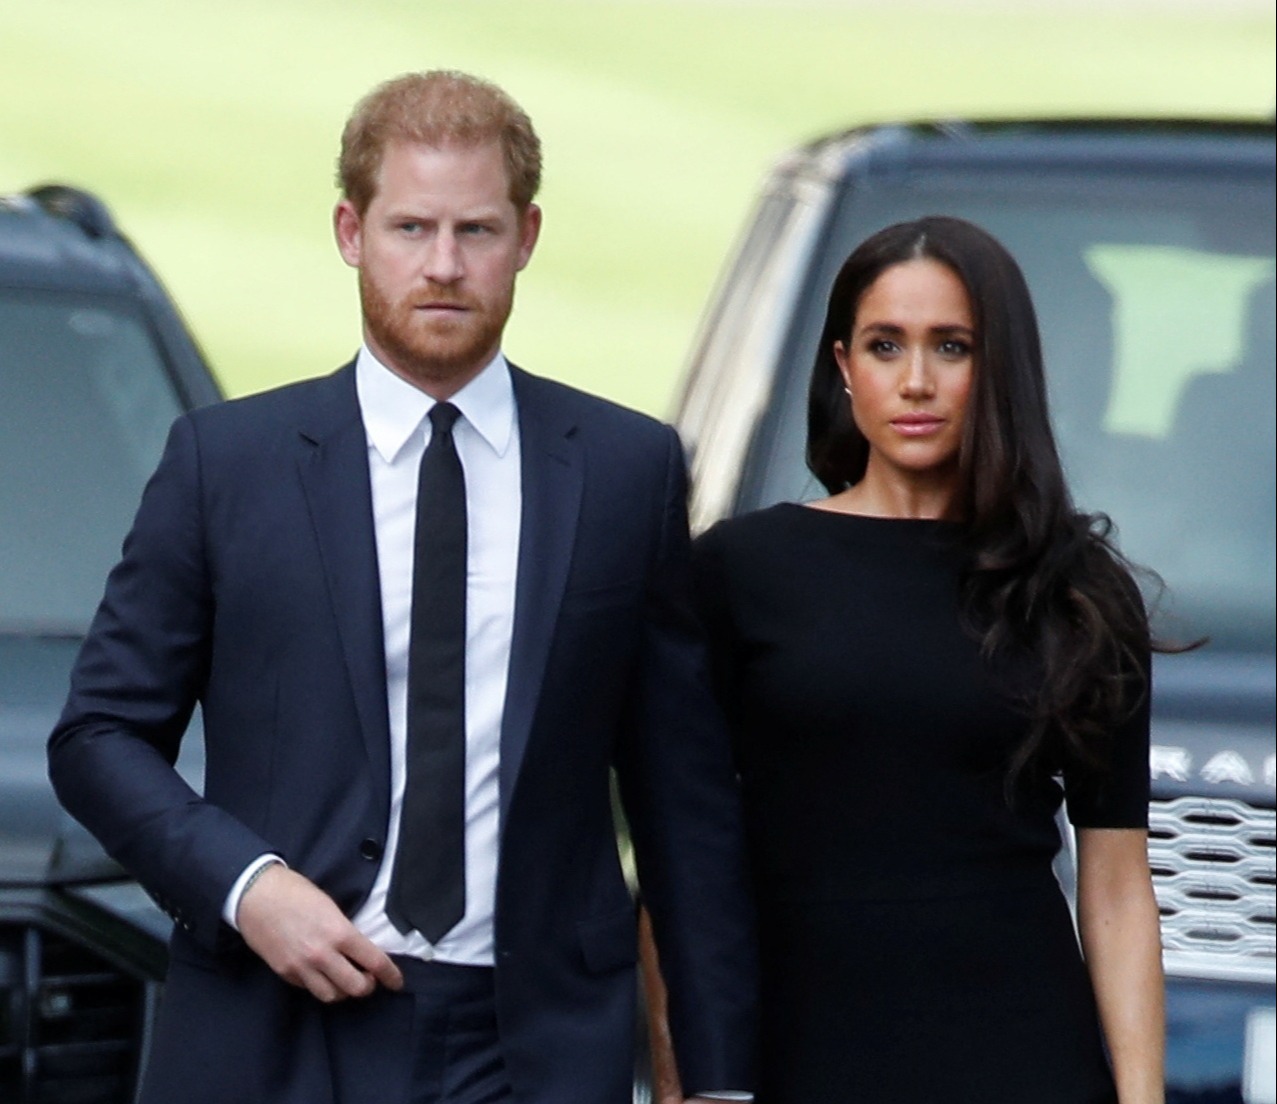 Meghan Markle and Prince Harry ‘worried’ they’re being edged out of Royals after telling change, royal expert claims